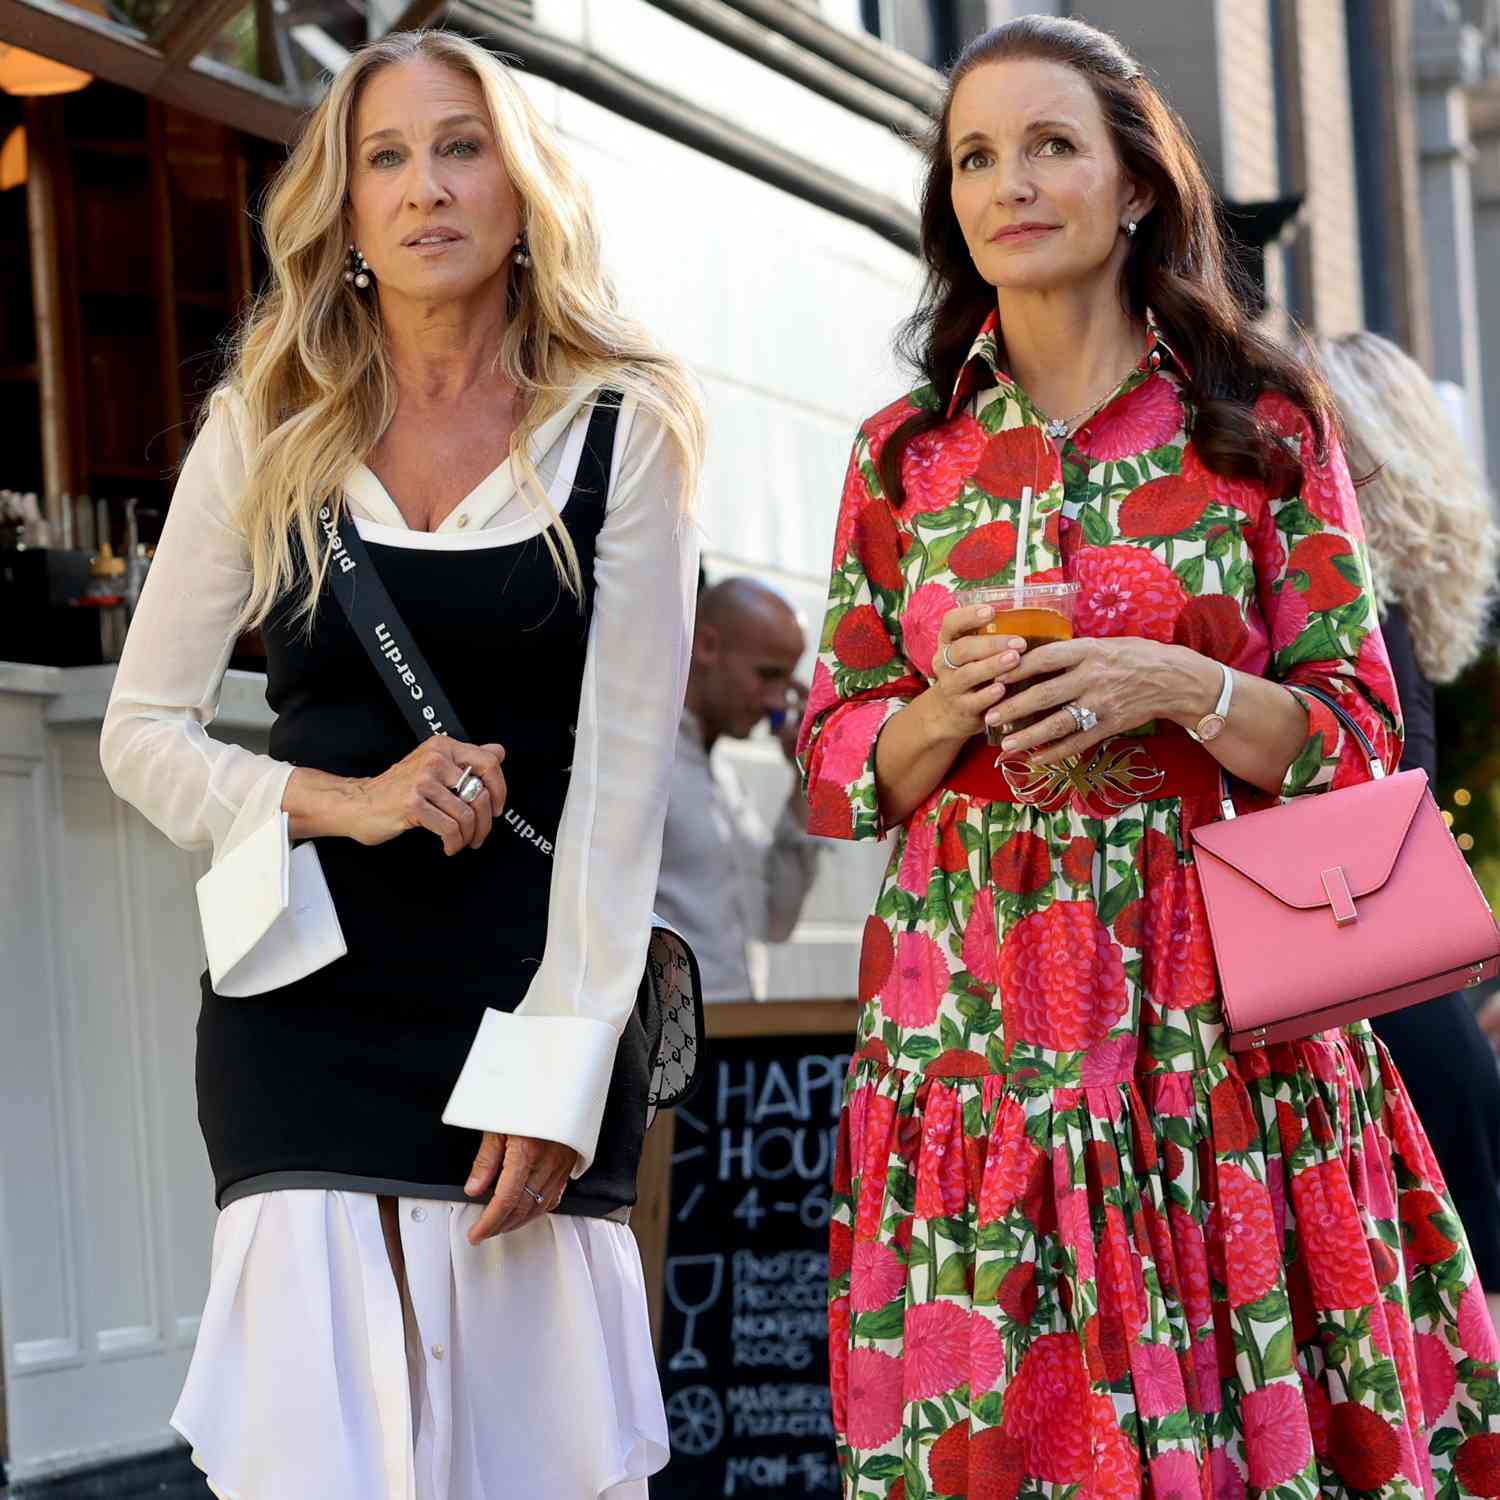 Sarah Jessica Parker and Kristin Davis were pictured filming on the set of And just like that